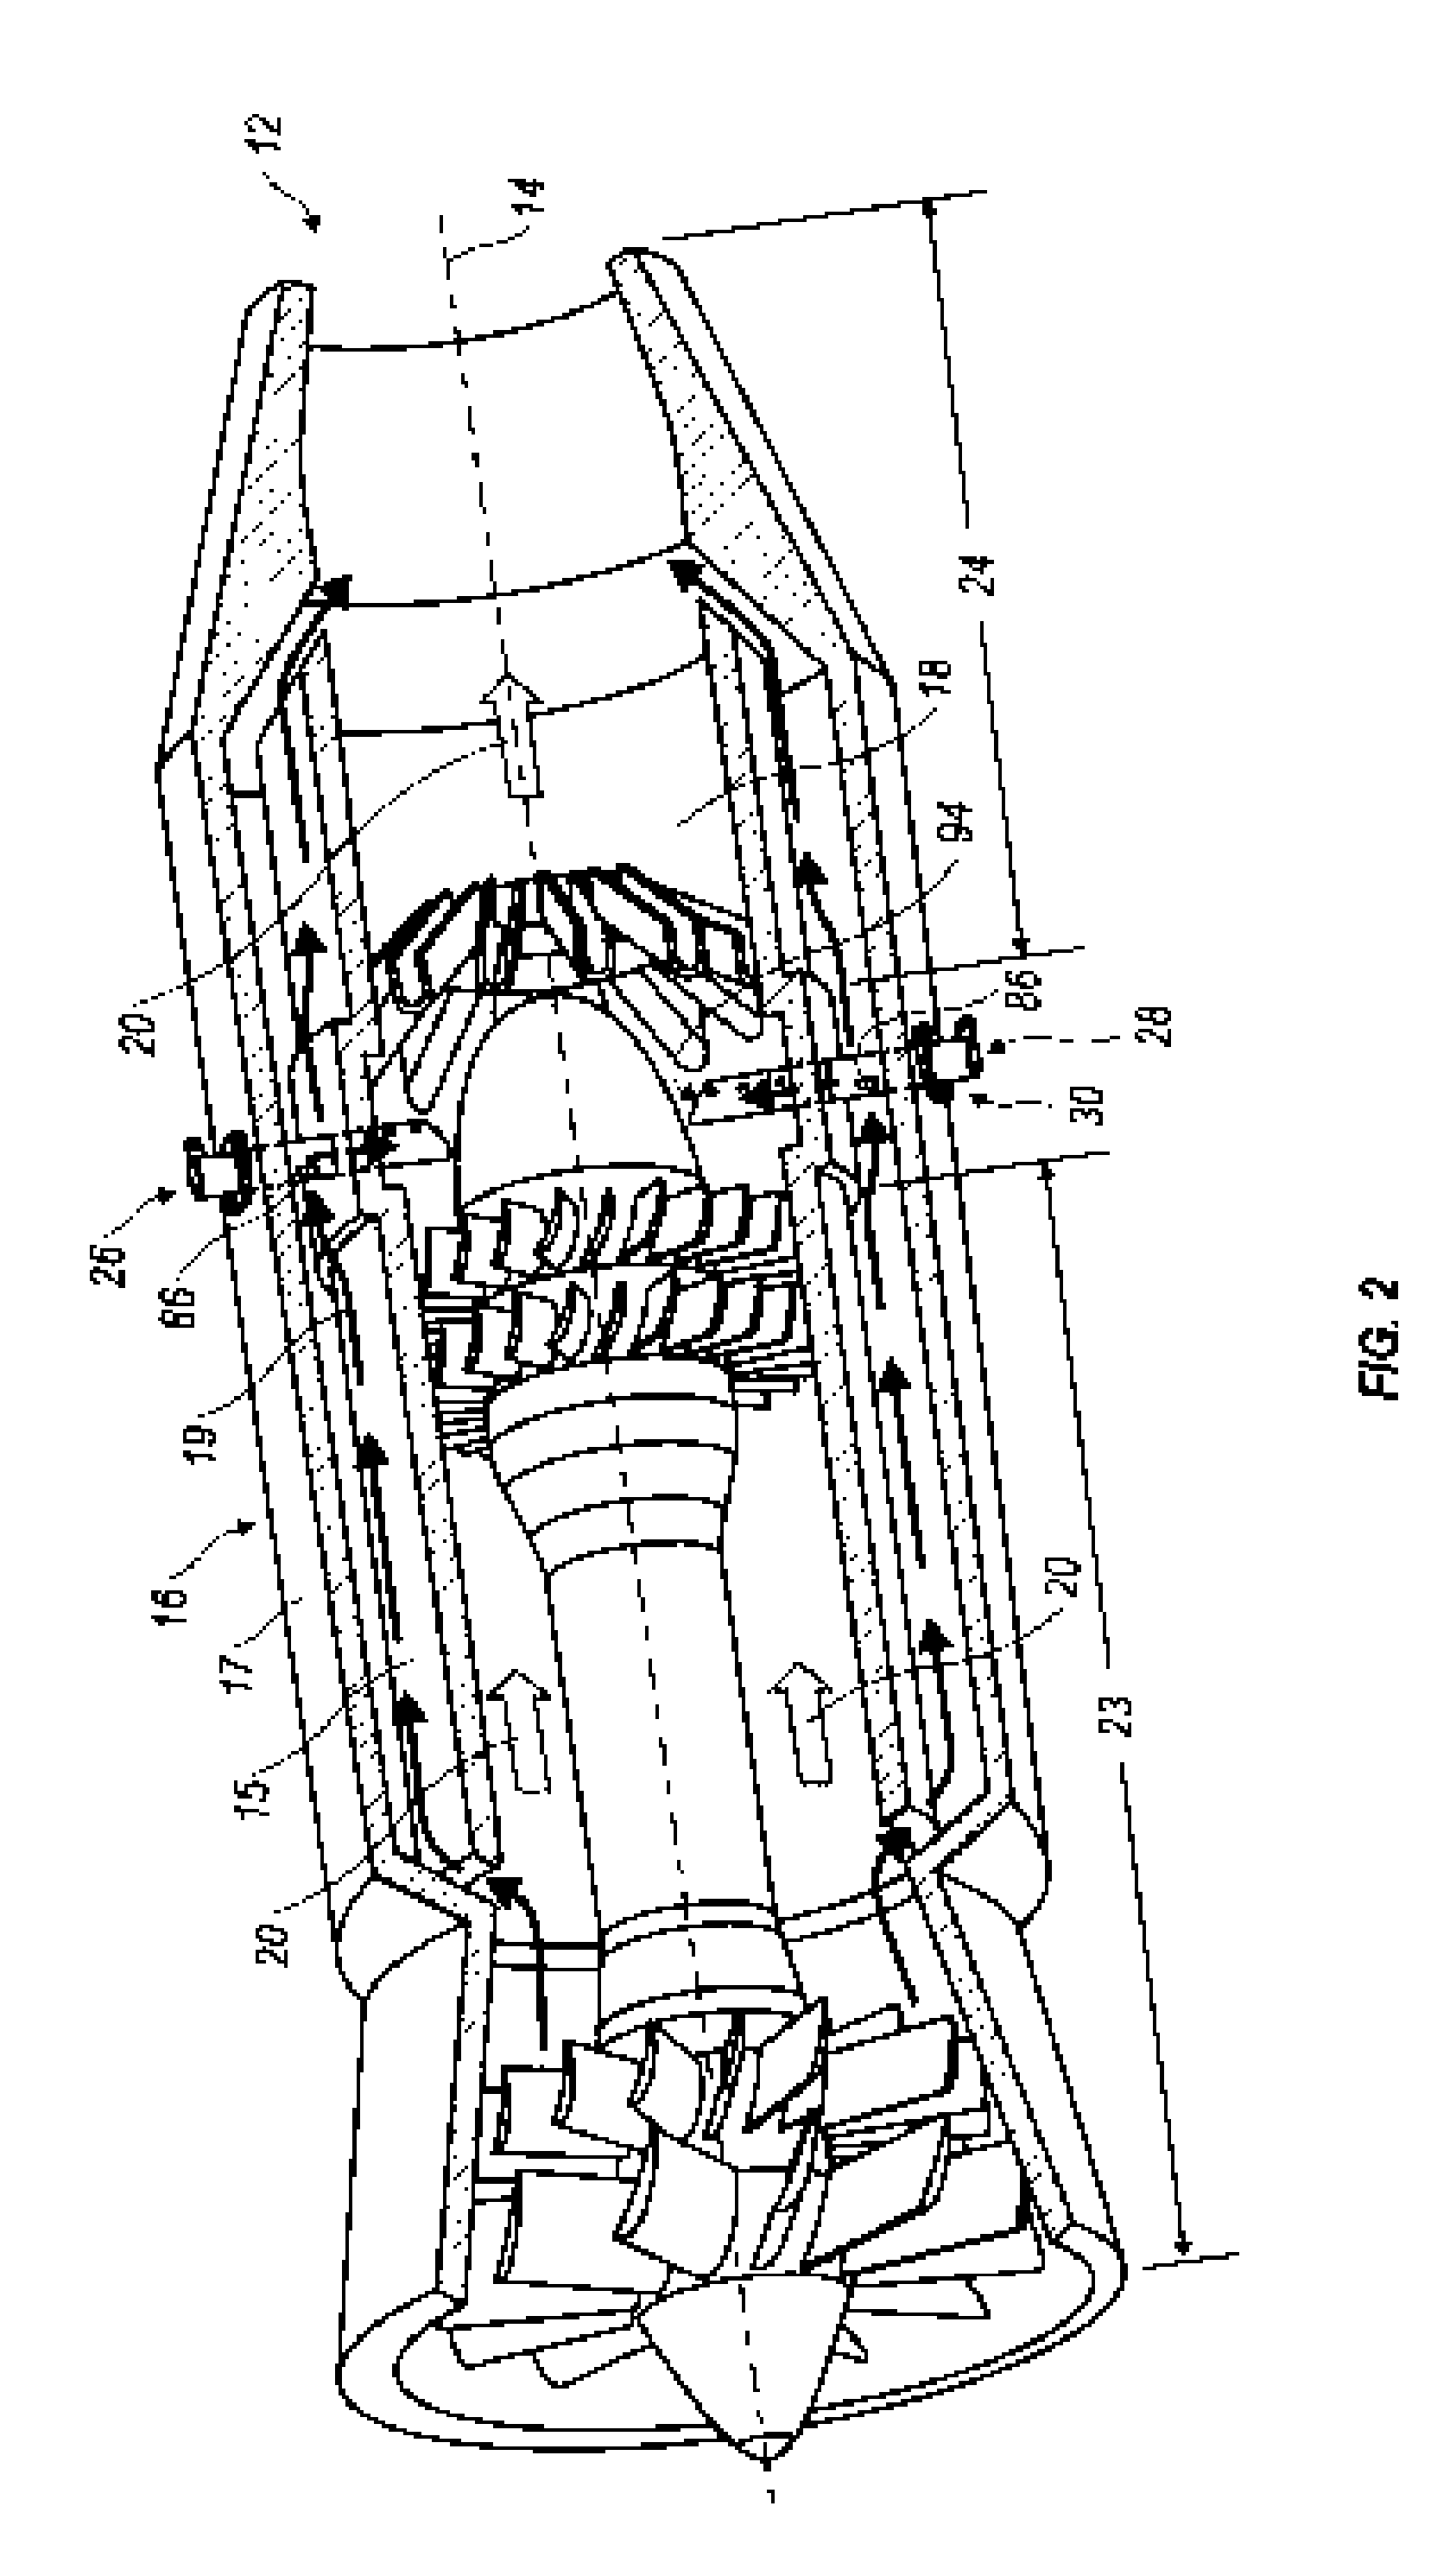 Method and apparatus for providing an afterburner fuel-feed arrangement